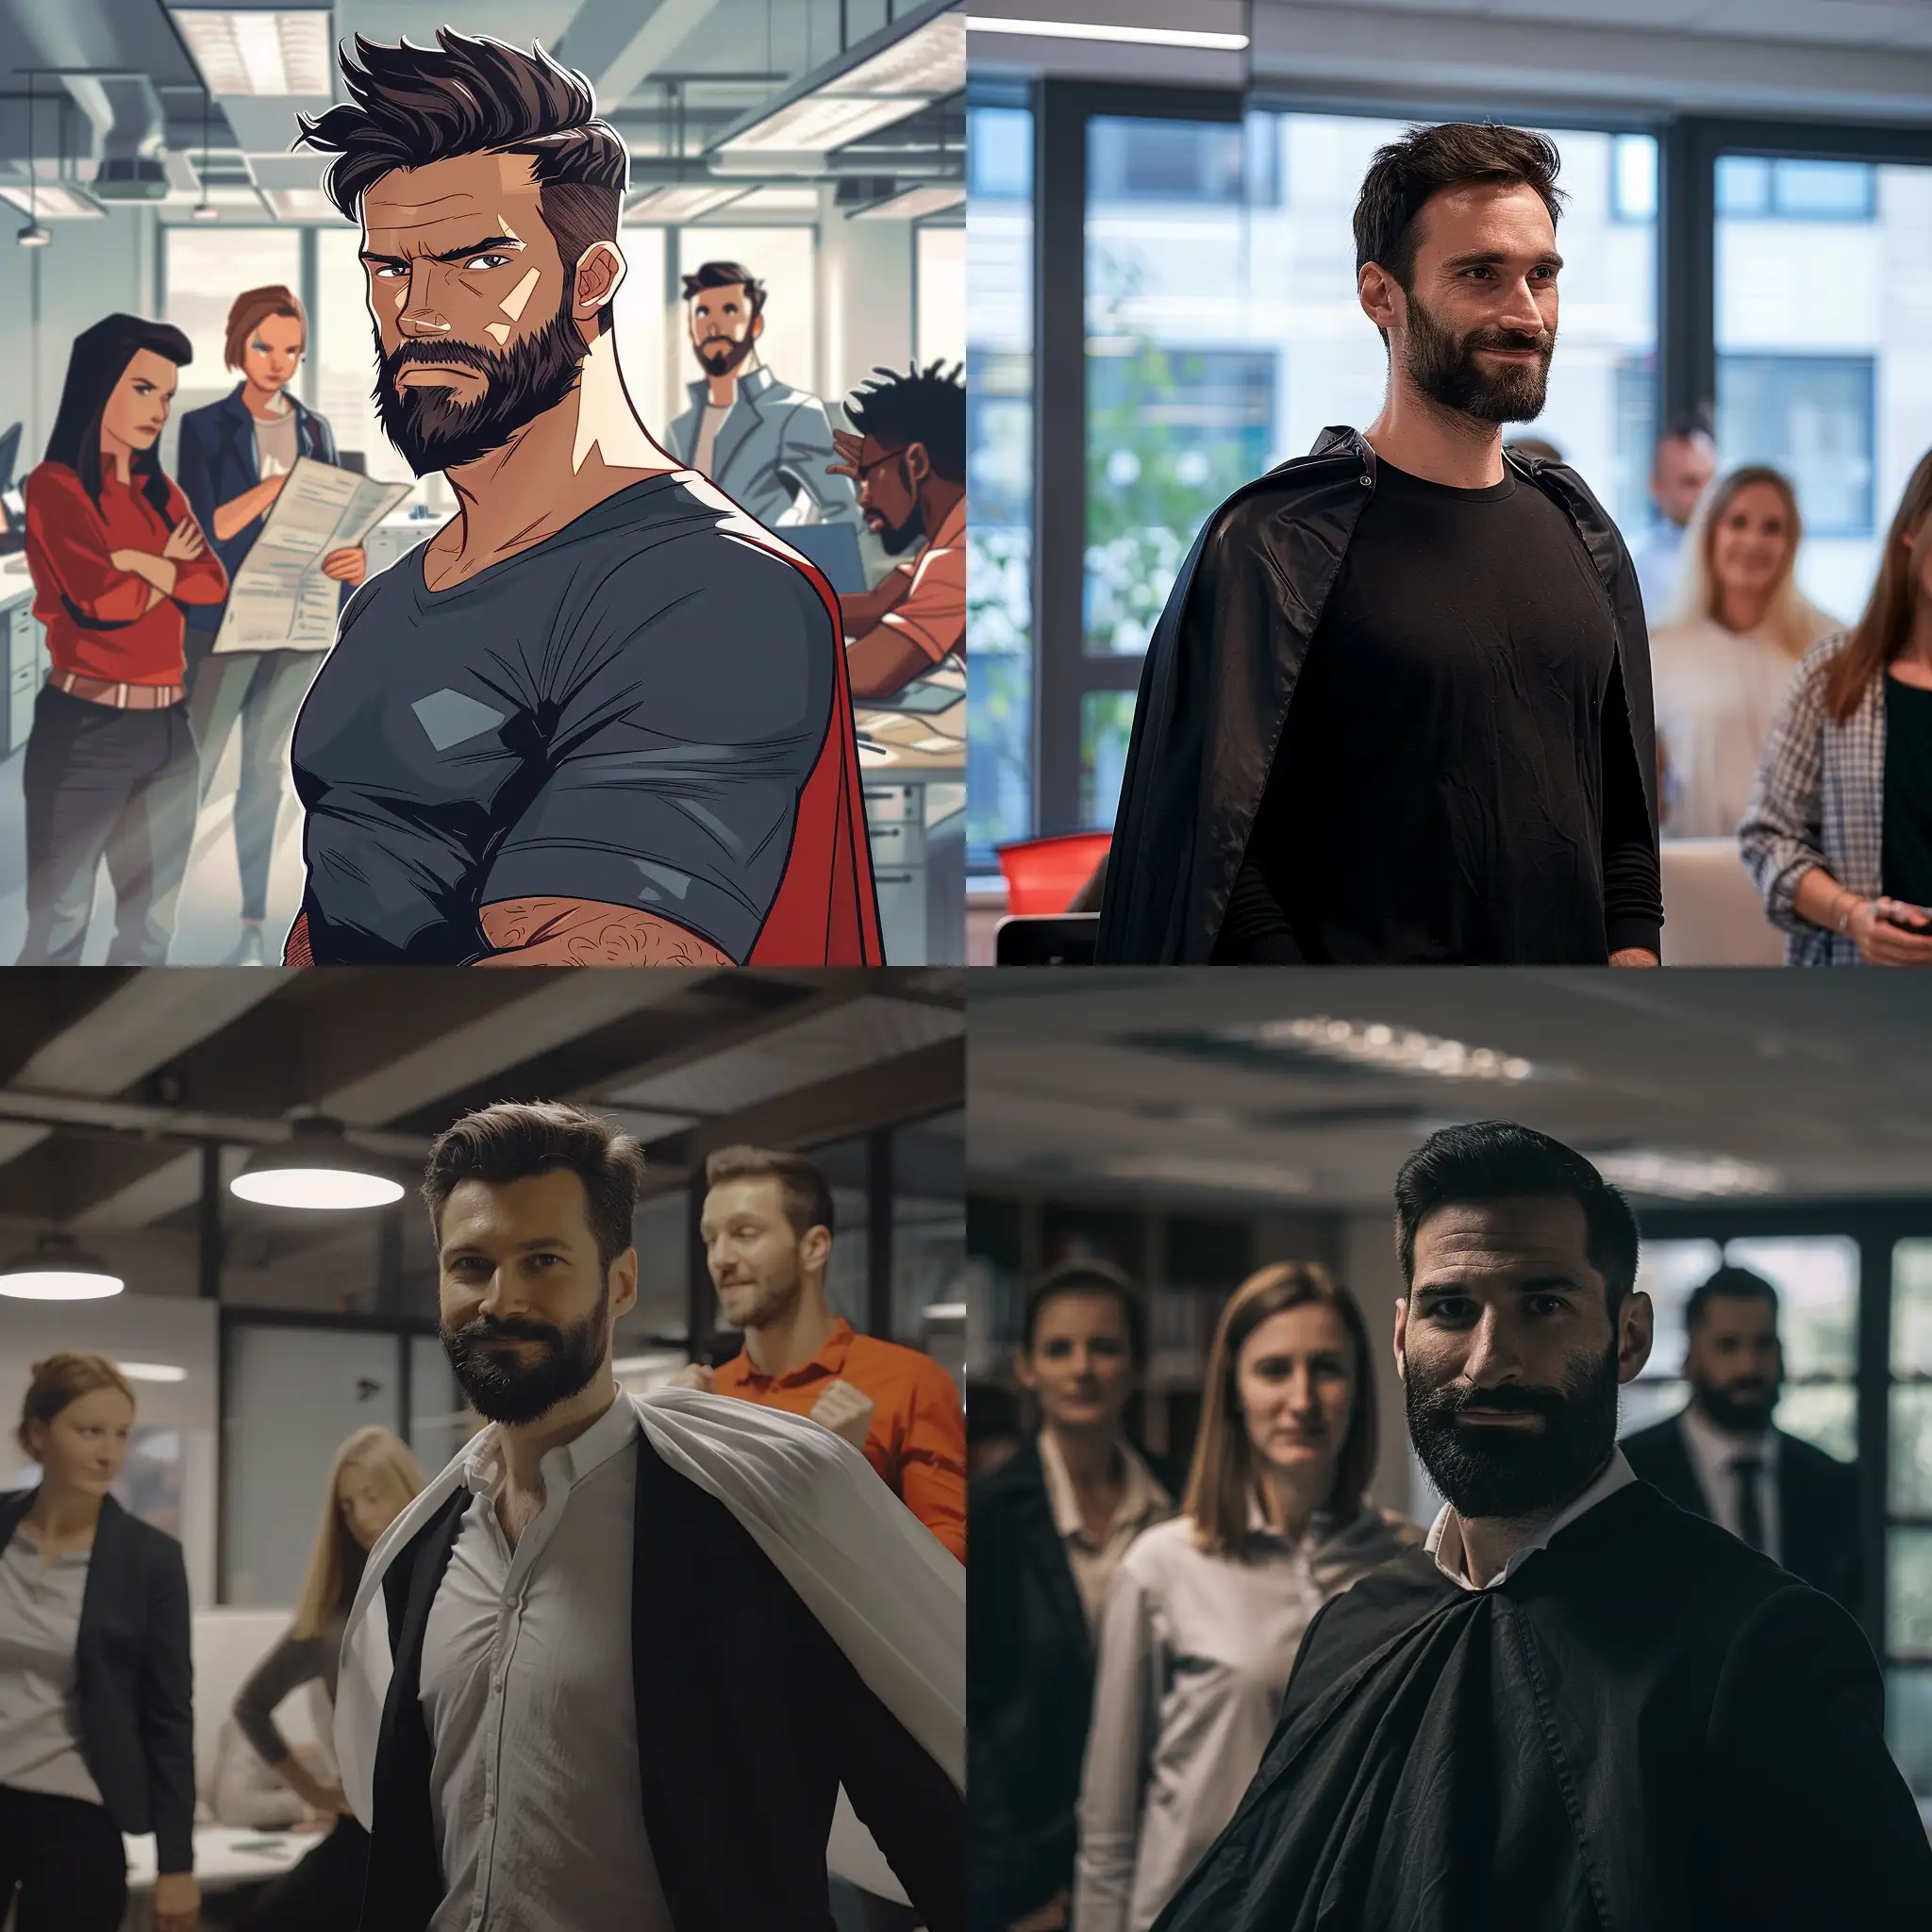 A superhero in a office setting called Florian (German, dark short hair, beard)  that can read the mind of his coworkers
